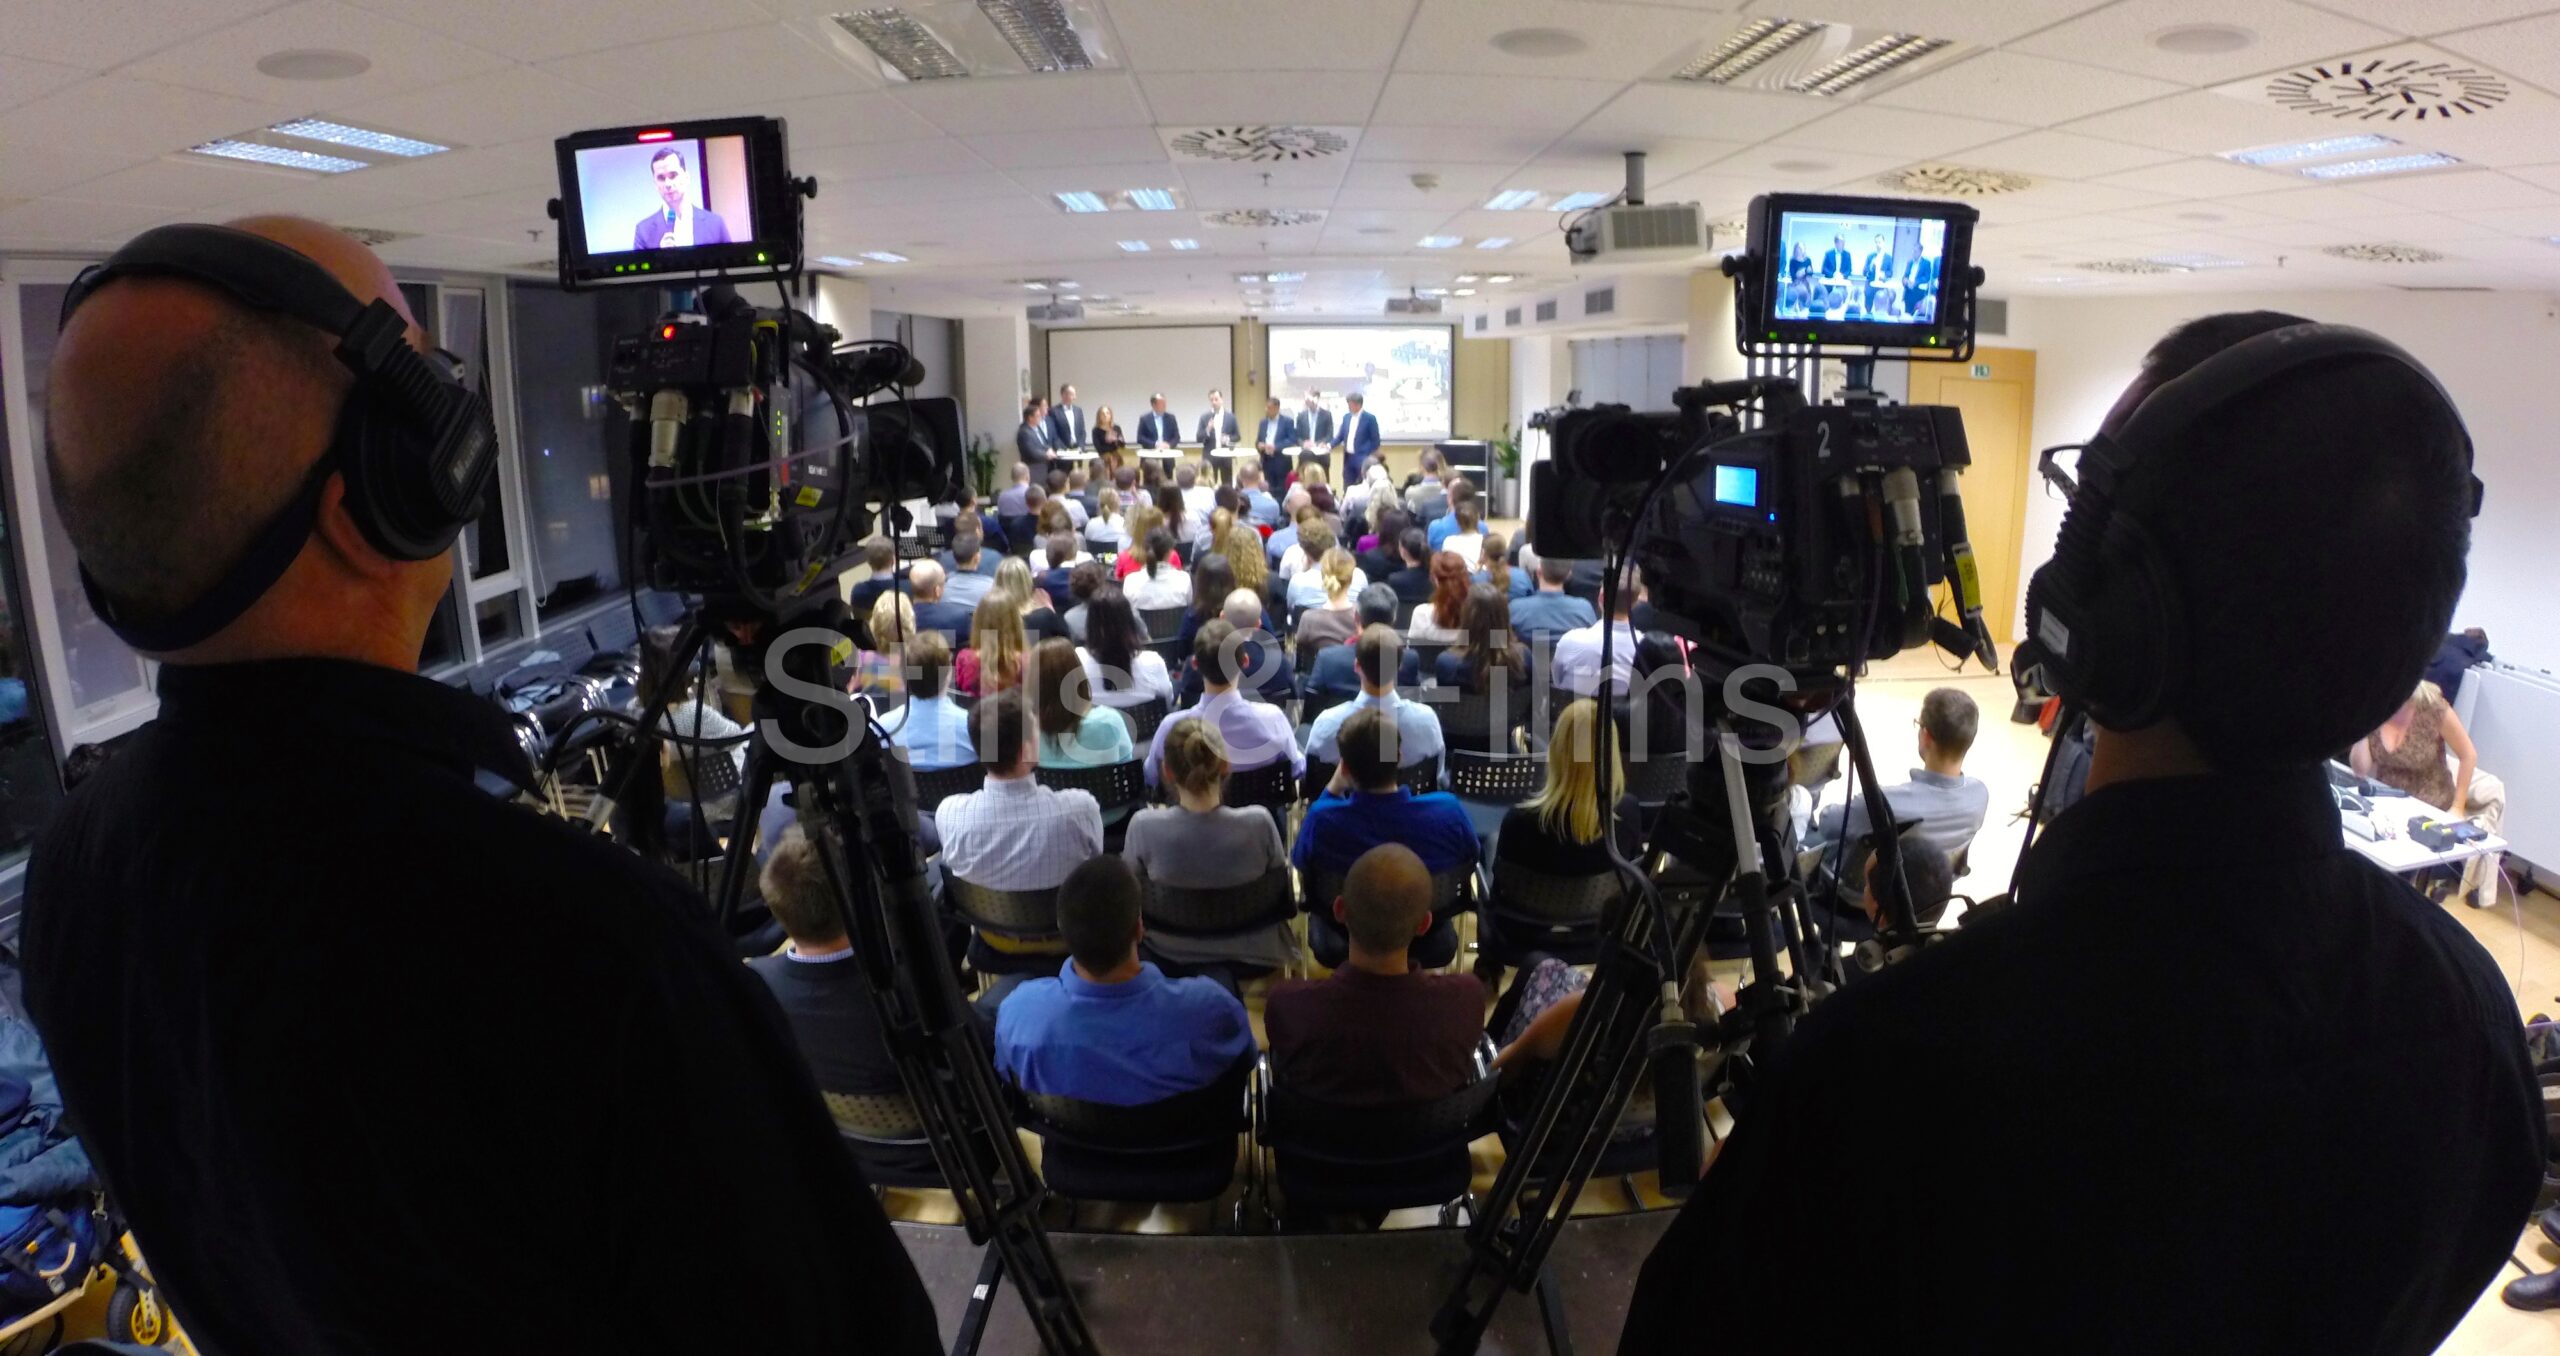 This was a corporate live conference video production for SwissRe from Bratislava. 